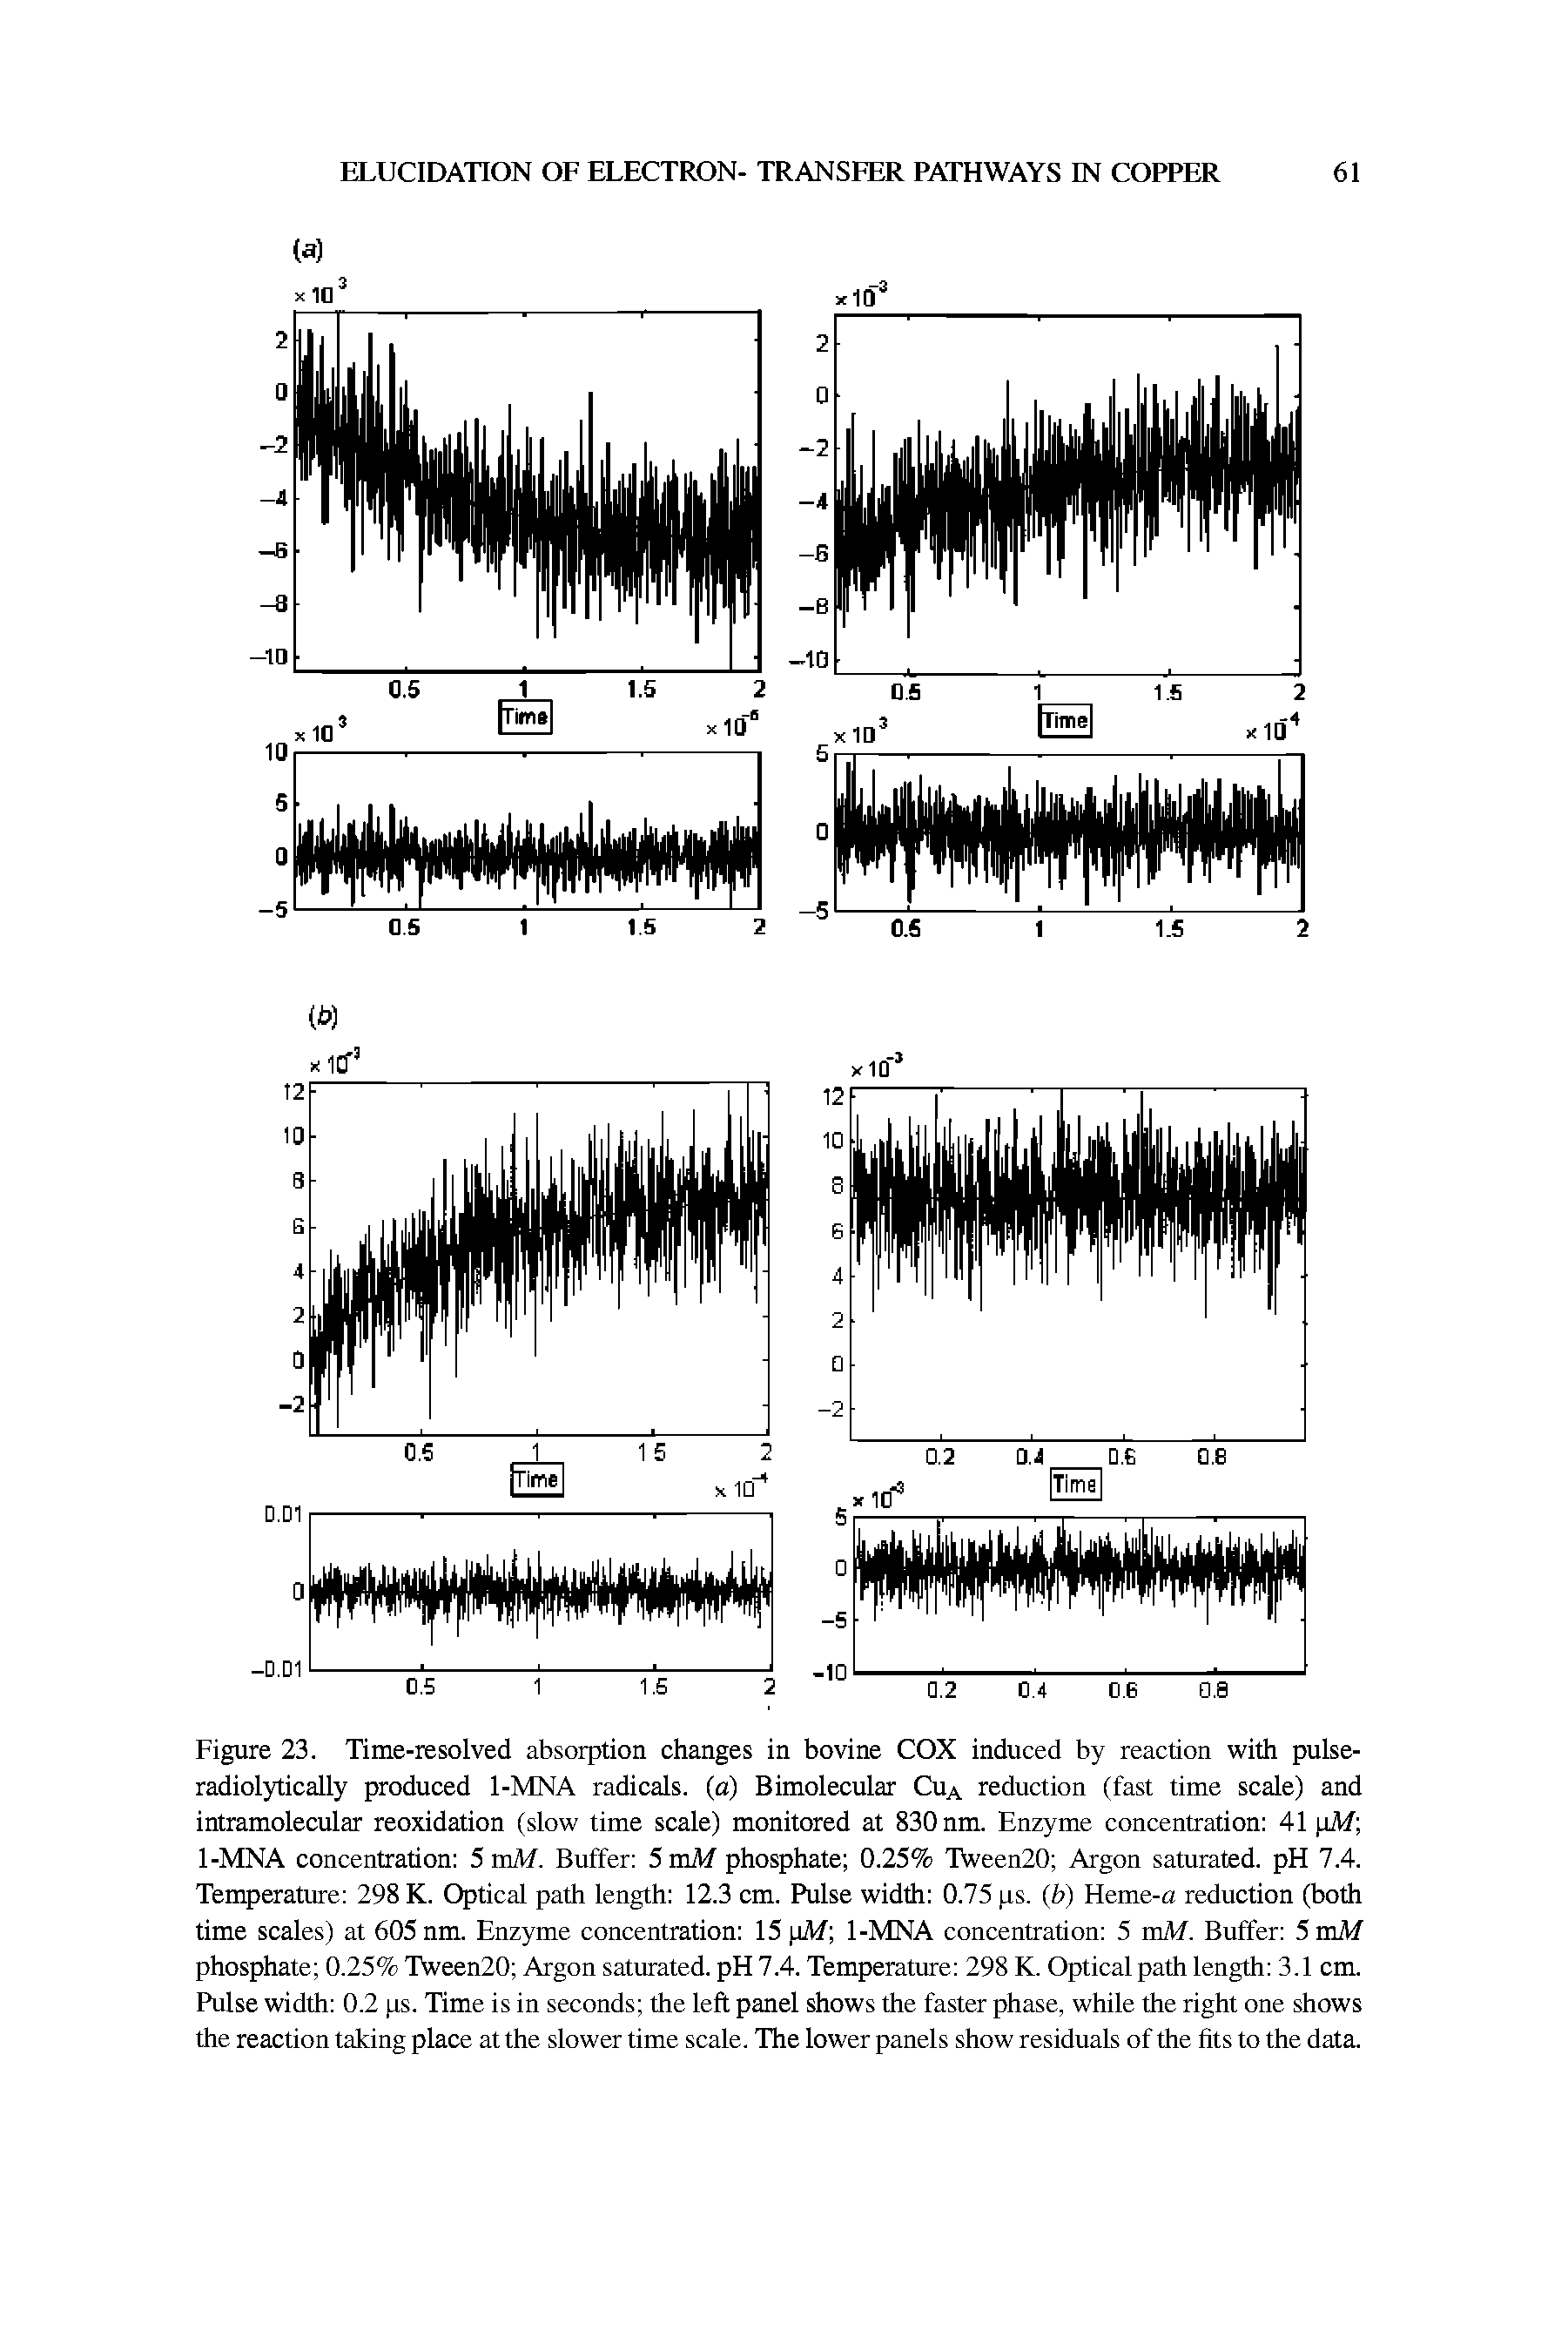 Figure 23. Time-resolved absorption changes in bovine COX induced by reaction with pulse-radioIyticaUy produced 1-MNA radicals, (a) Bimolecular Cua reduction (fast time scale) and intramolecular reoxidation (slow time scale) monitored at 830 nnL Enzyme concentration 41 pM 1-MNA concentration 5 mM. Buffer 5 roM phosphate 0.25% TWeen20 Argon saturated. pH 7.4. Temperature 298 K. Optical path length 12.3 cm. Pulse width 0.75 ps. (b) Heme-a reduction (both time scales) at 605 nno. Enzyme concentration 15 pAf 1-MNA concentration 5 mM. Buffer 5 mM phosphate 0.25% Tween20 Argon saturated. pH 7.4. Temperature 298 K. Optical path length 3.1 cnL Pulse width 0.2 ps. Time is in seconds the left panel shows the faster phase, while the right one shows the reaction taking place at the slower time scale. The lower panels show residuals of the fits to the data.